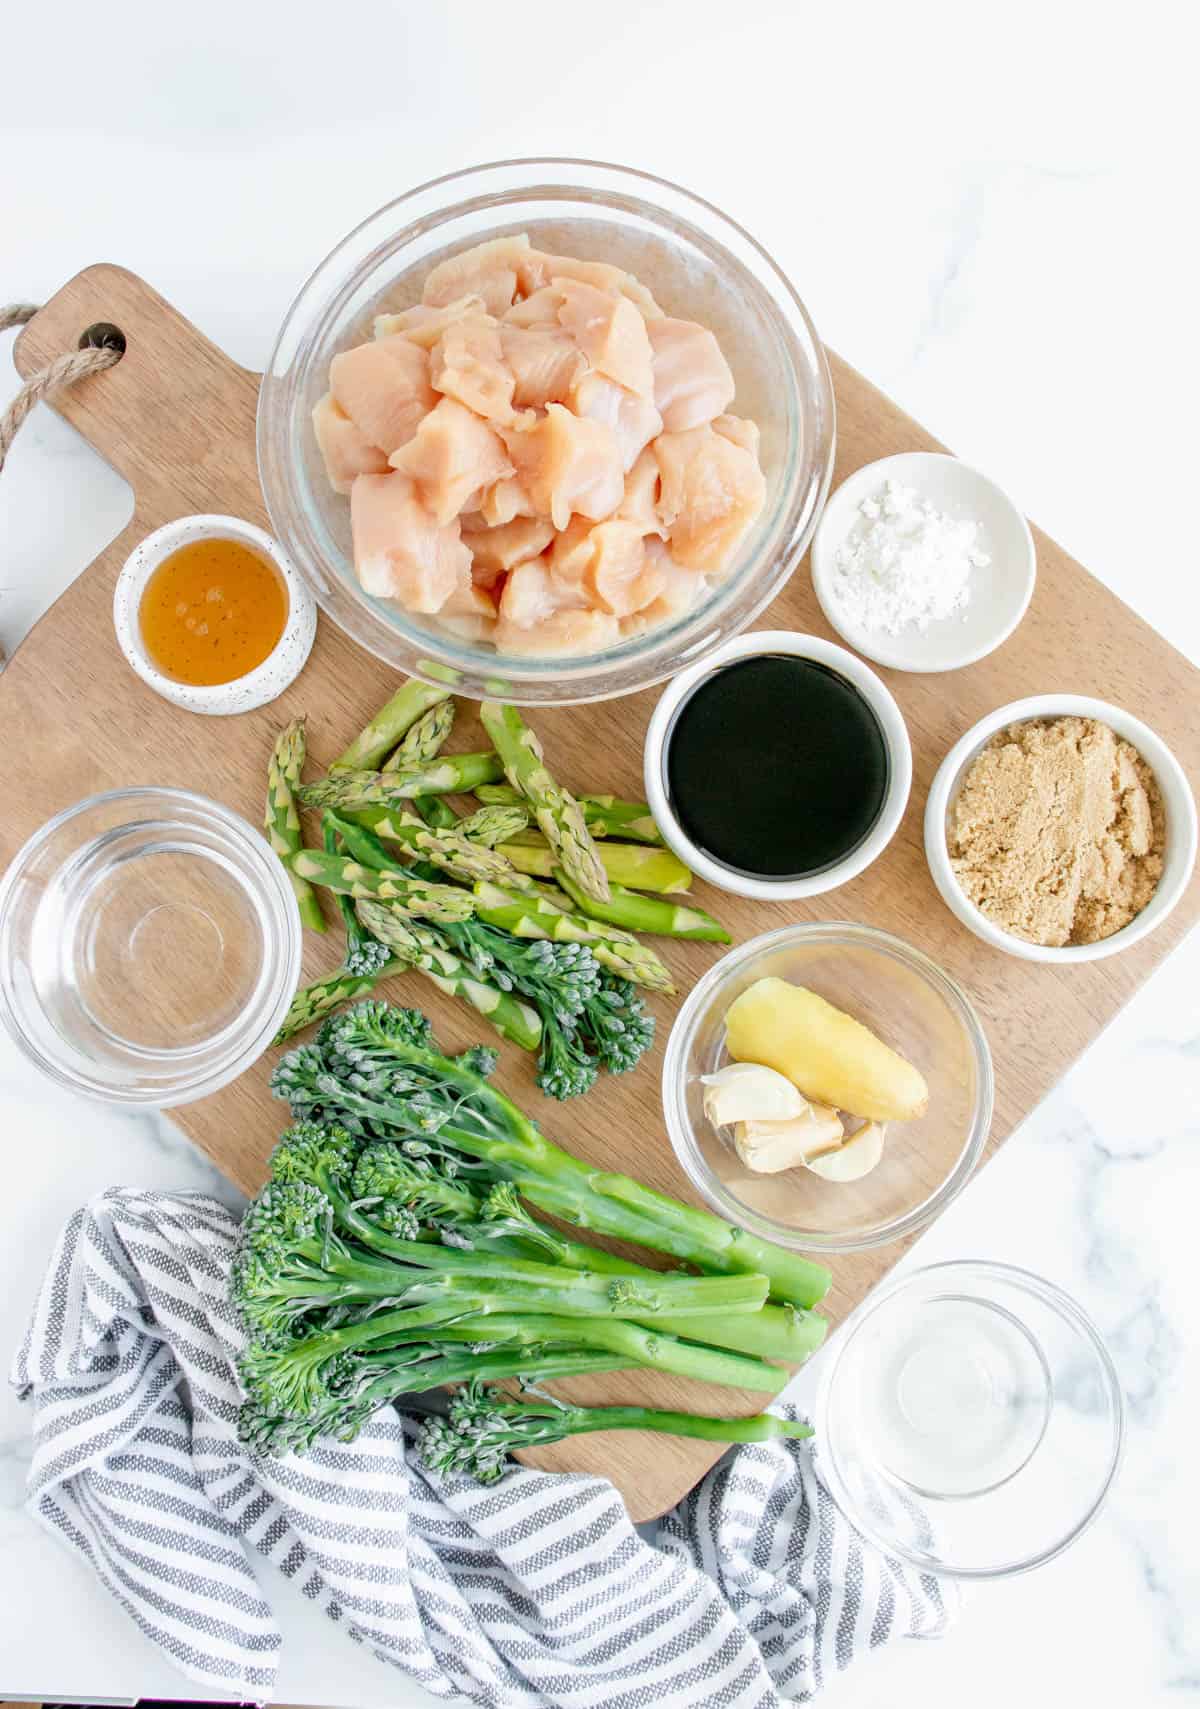 Ingredients for Teriyaki Chicken with asparagus and broccolini, displayed in separate bowls on a wooden cutting board